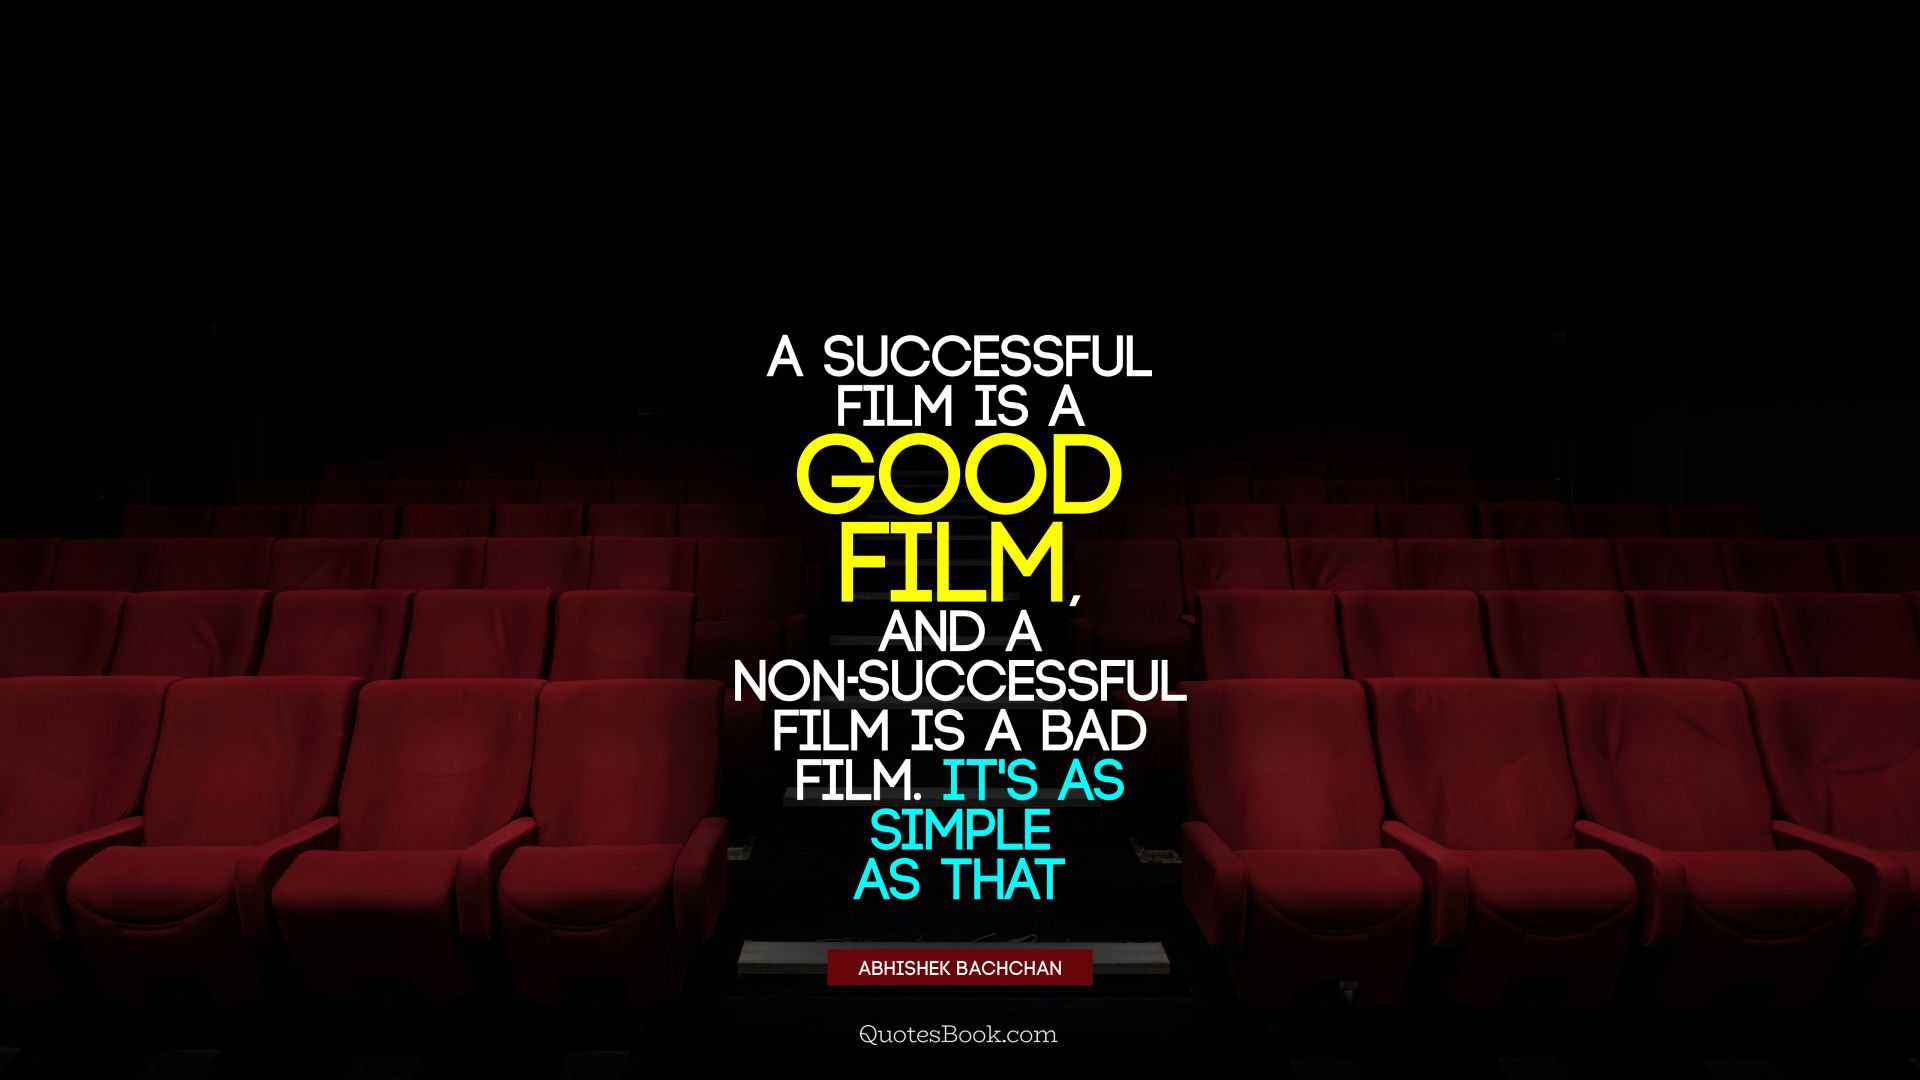 A successful film is a good film, and a non-successful film is a bad film. It's as simple as that. - Quote by Abhishek Bachchan